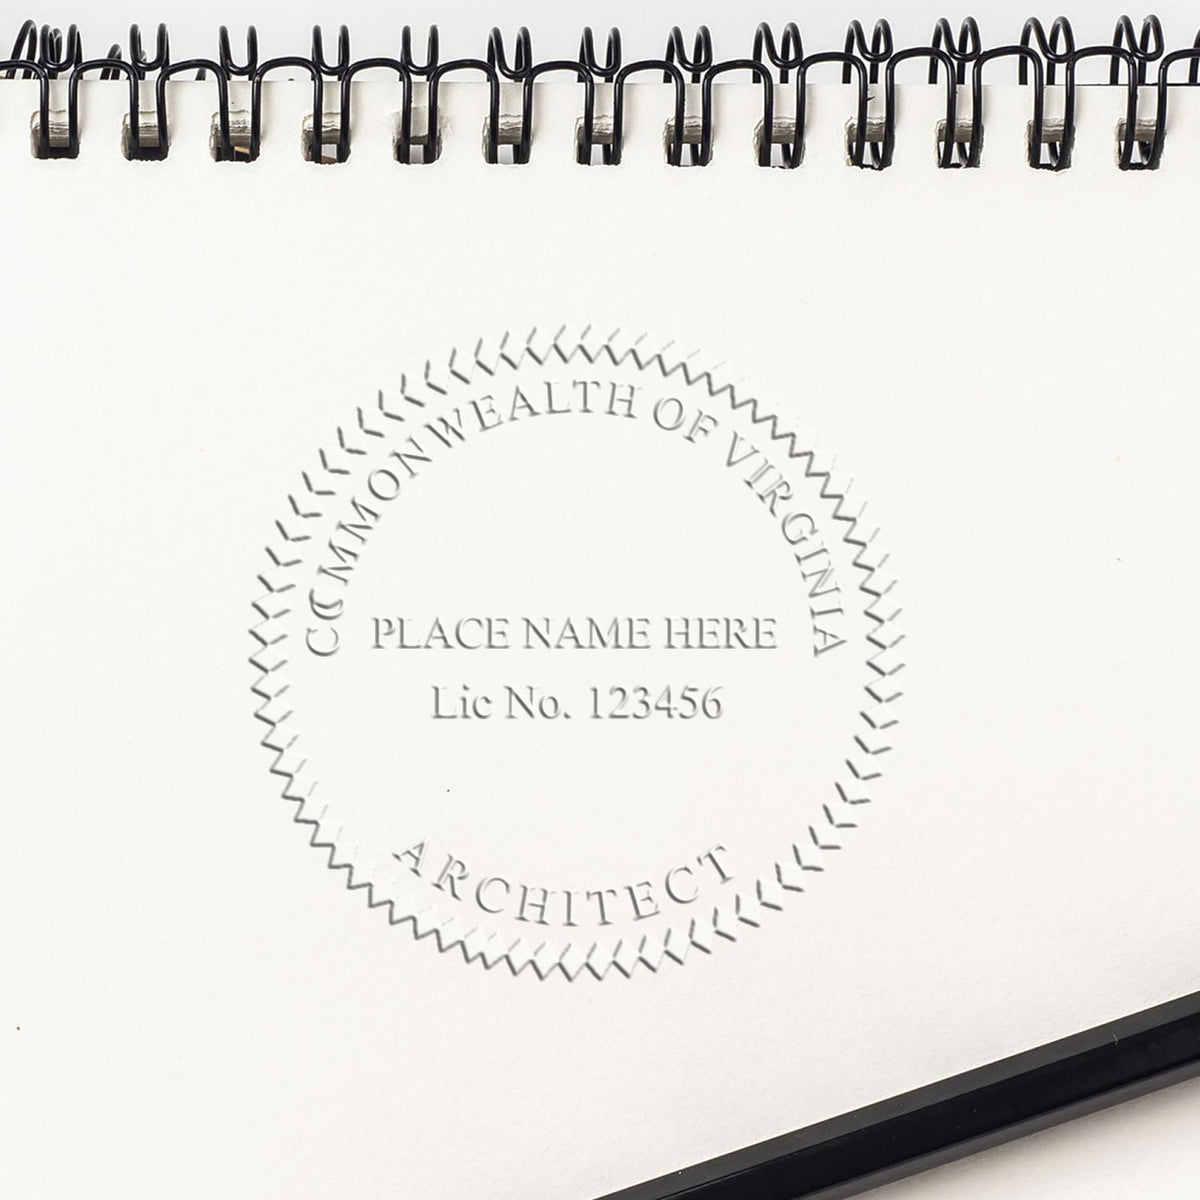 This paper is stamped with a sample imprint of the Extended Long Reach Virginia Architect Seal Embosser, signifying its quality and reliability.